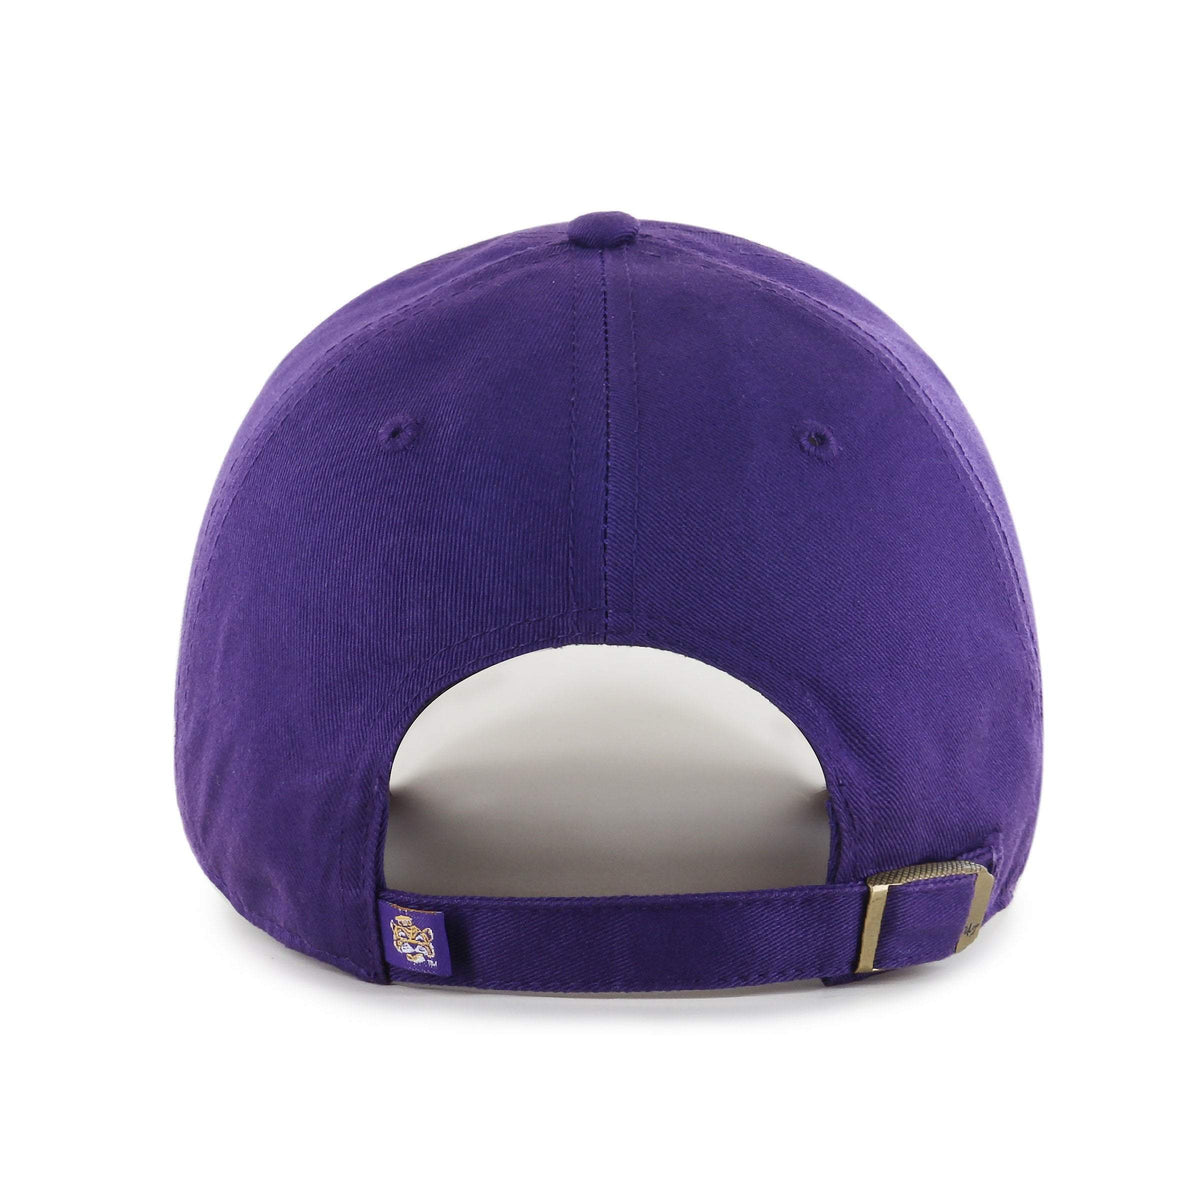 LOUISIANA STATE TIGERS LSU VINTAGE '47 CLEAN UP